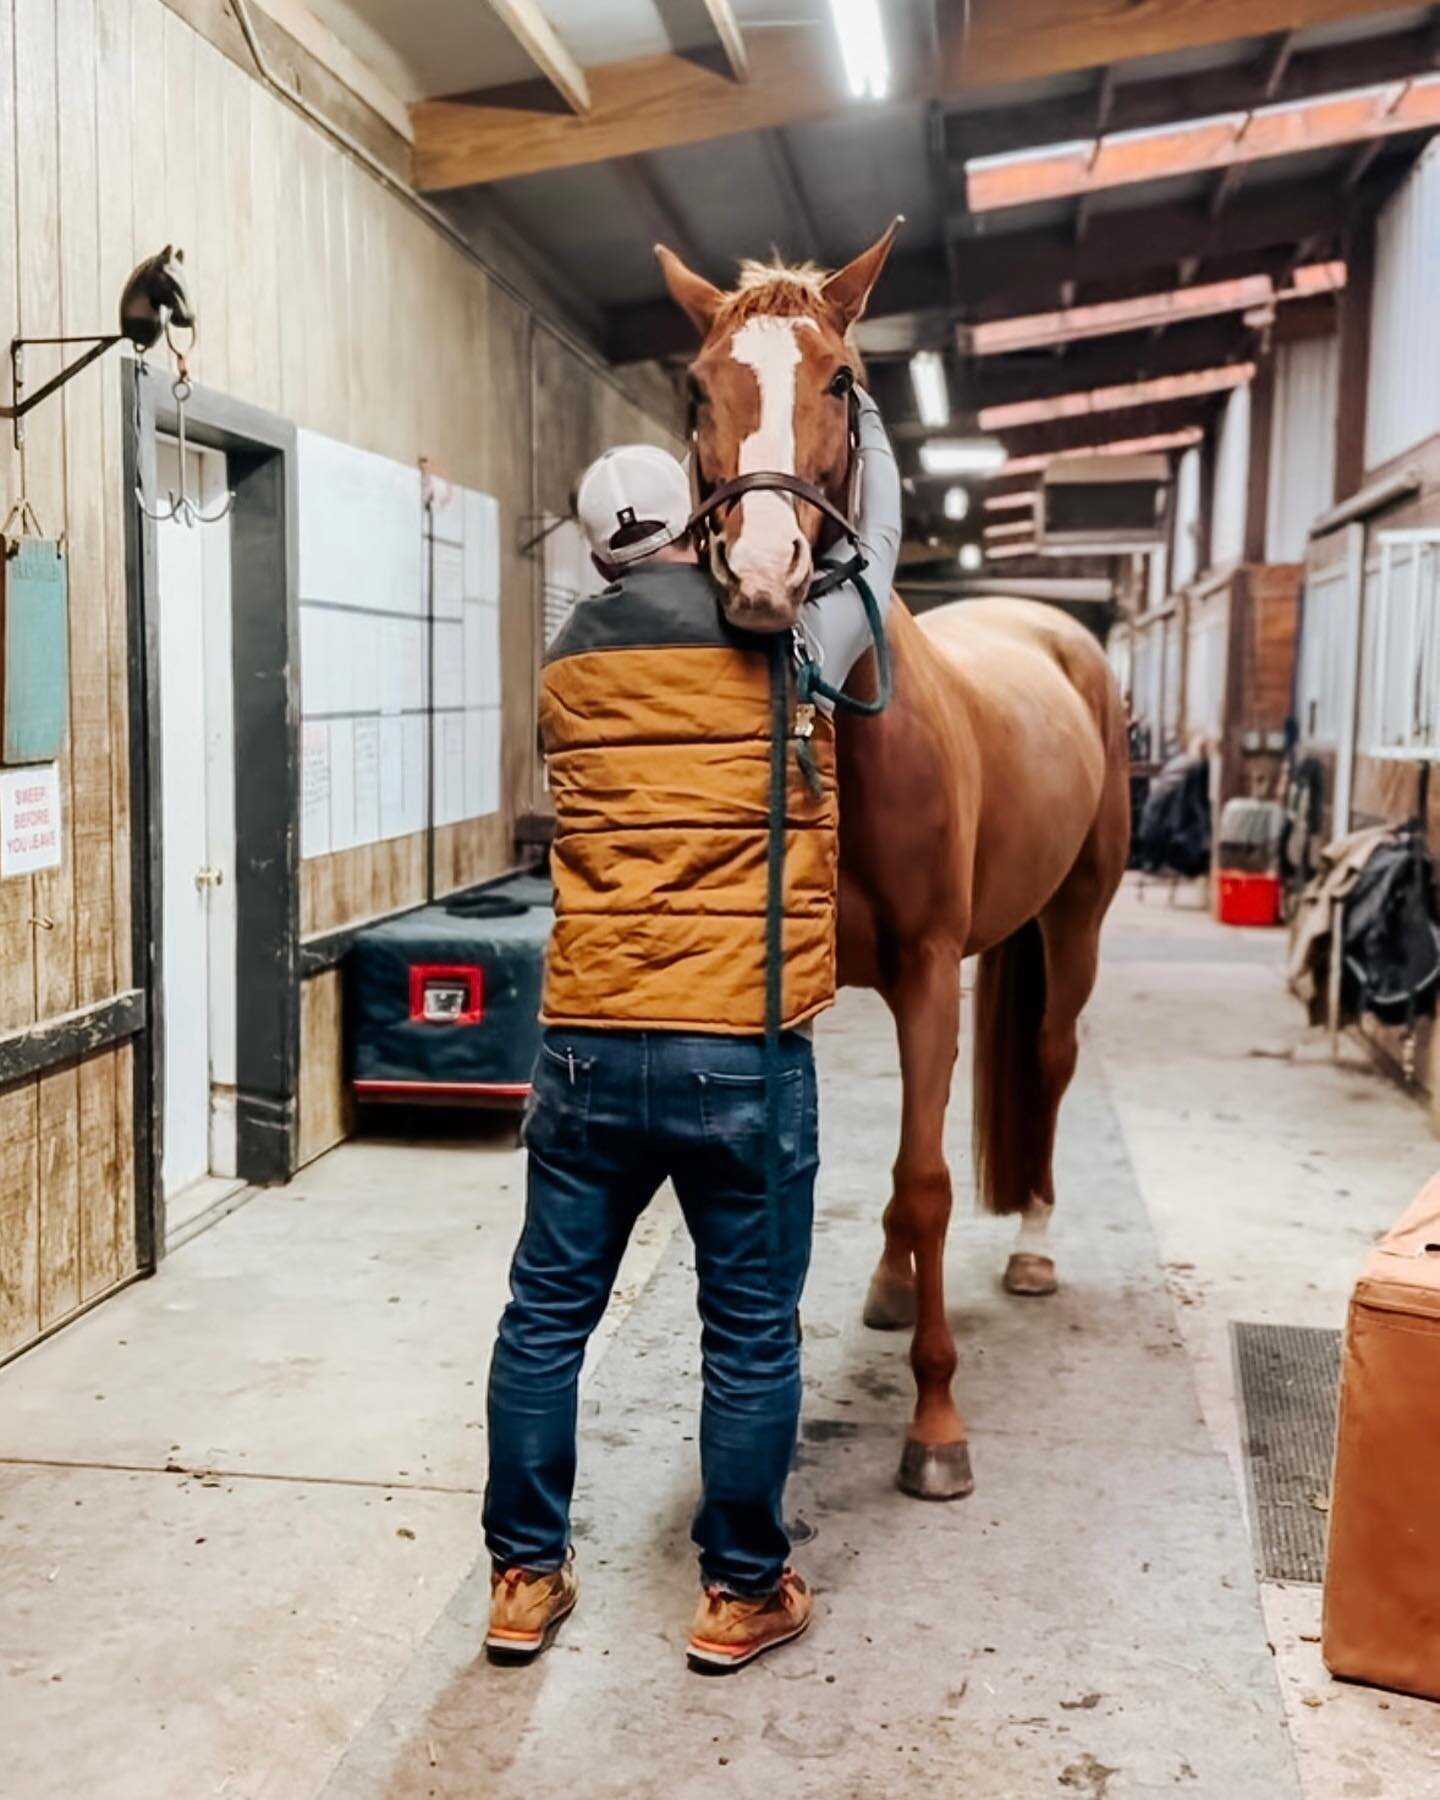 E Q U I N E  C H I R O P R A C T I C 
 
 
 
The goal of equine chiropractic is to help the nervous system function better. When structure shifts in the spine are removed, common symptoms go away. Common symptoms horses see a chiropractor for are: poo